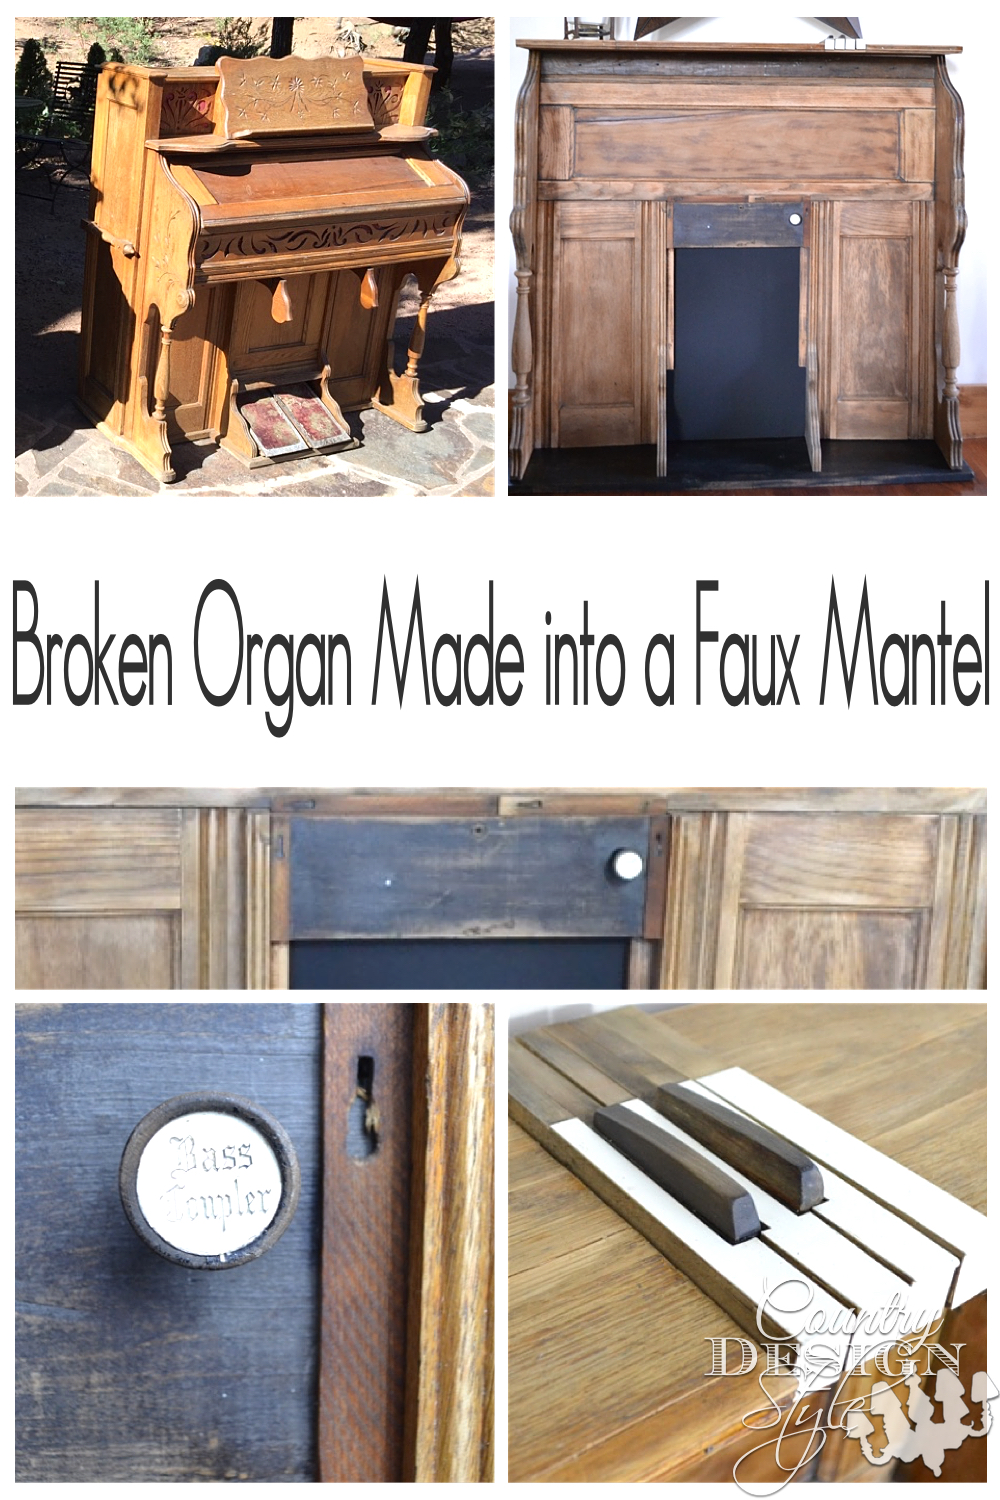 The Details of added organ pieces into a faux mantel. Organ remade into faux mantel with tutorial for inserting piano keys into top. | countrydesignstyle.com 